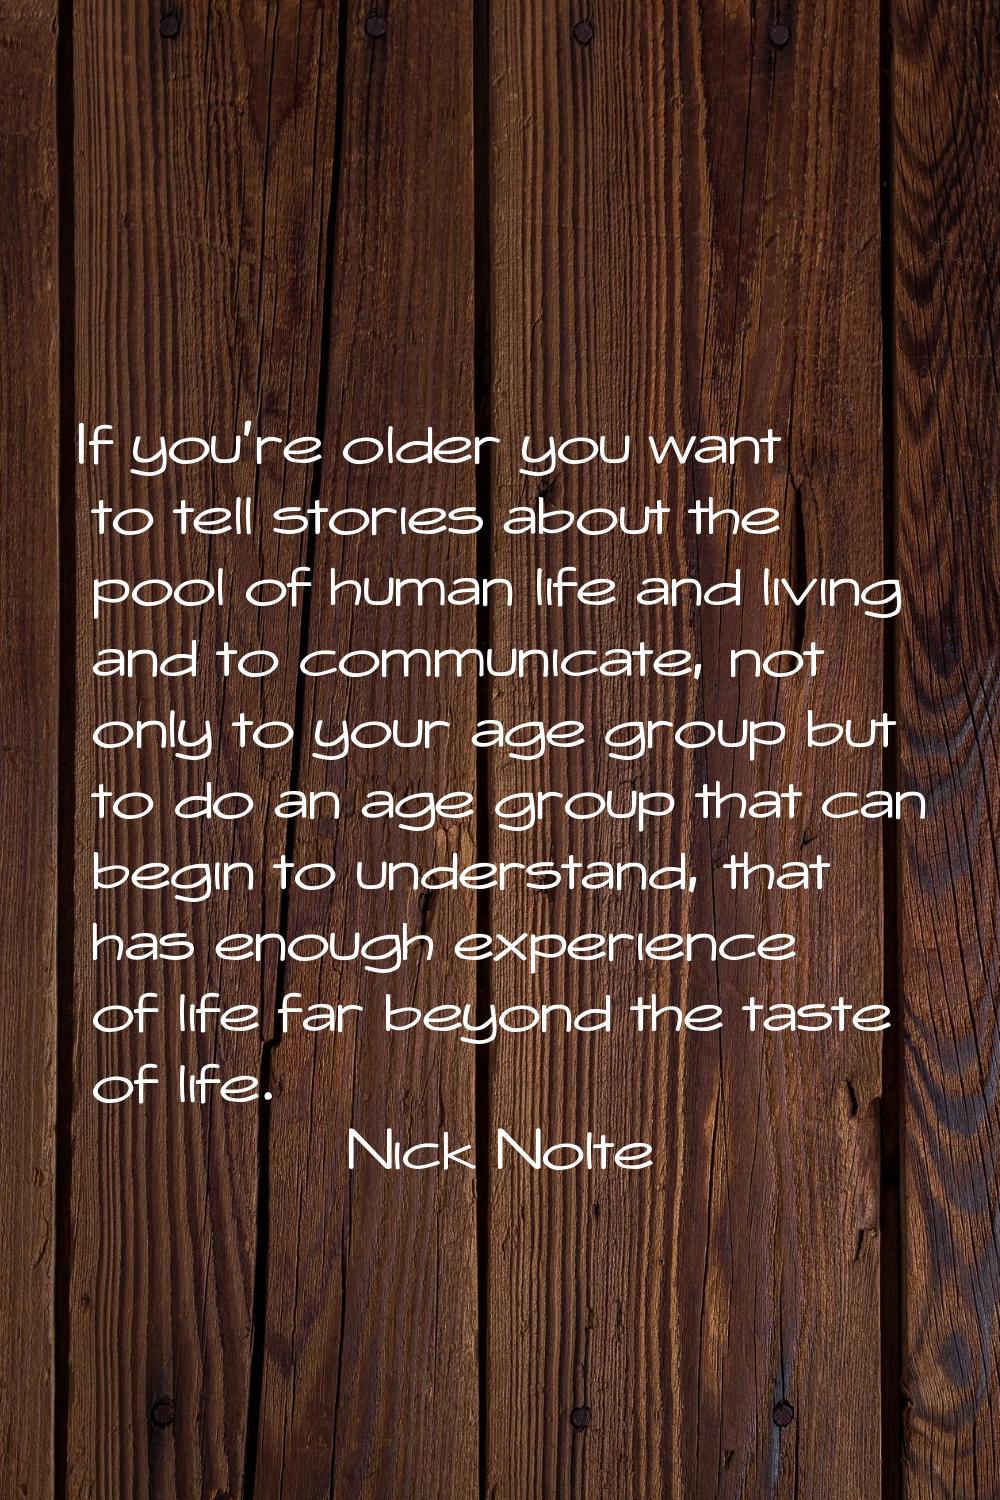 If you're older you want to tell stories about the pool of human life and living and to communicate